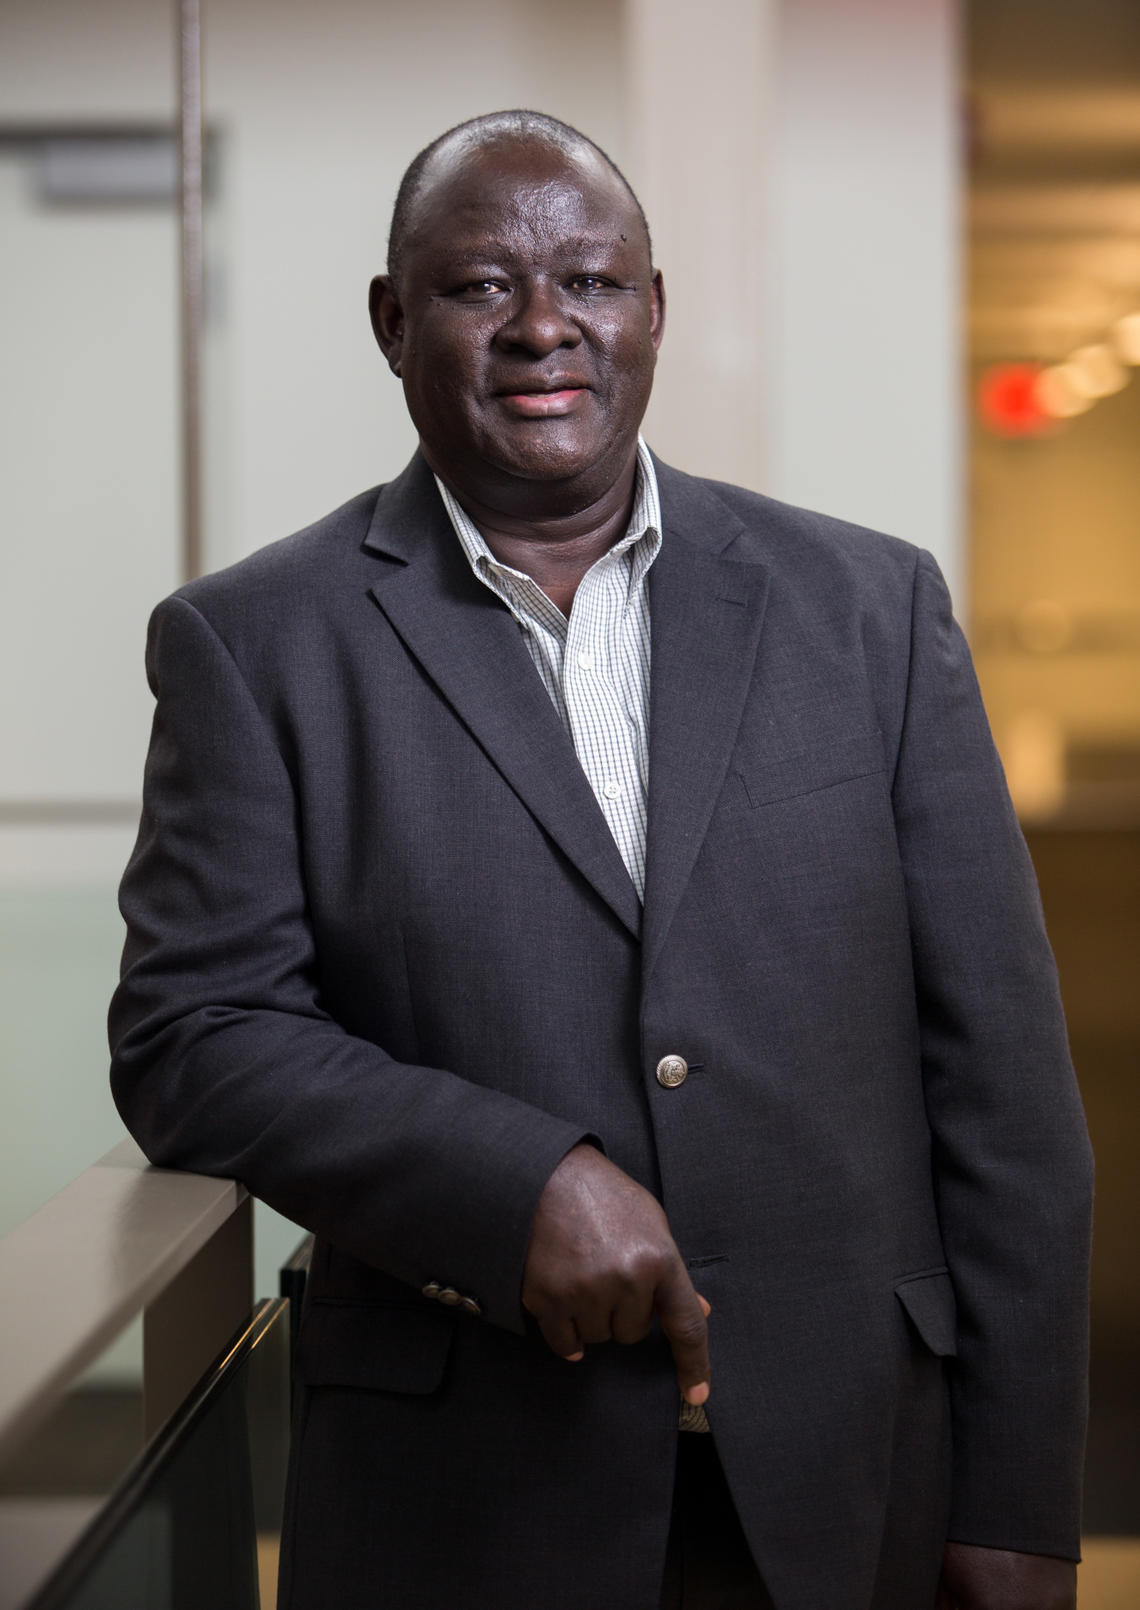 New education specialist William Yimbo leverages expertise to advance diversity, equity and inclusion at the University of Calgary. Photo by Riley Brandt, University of Calgary